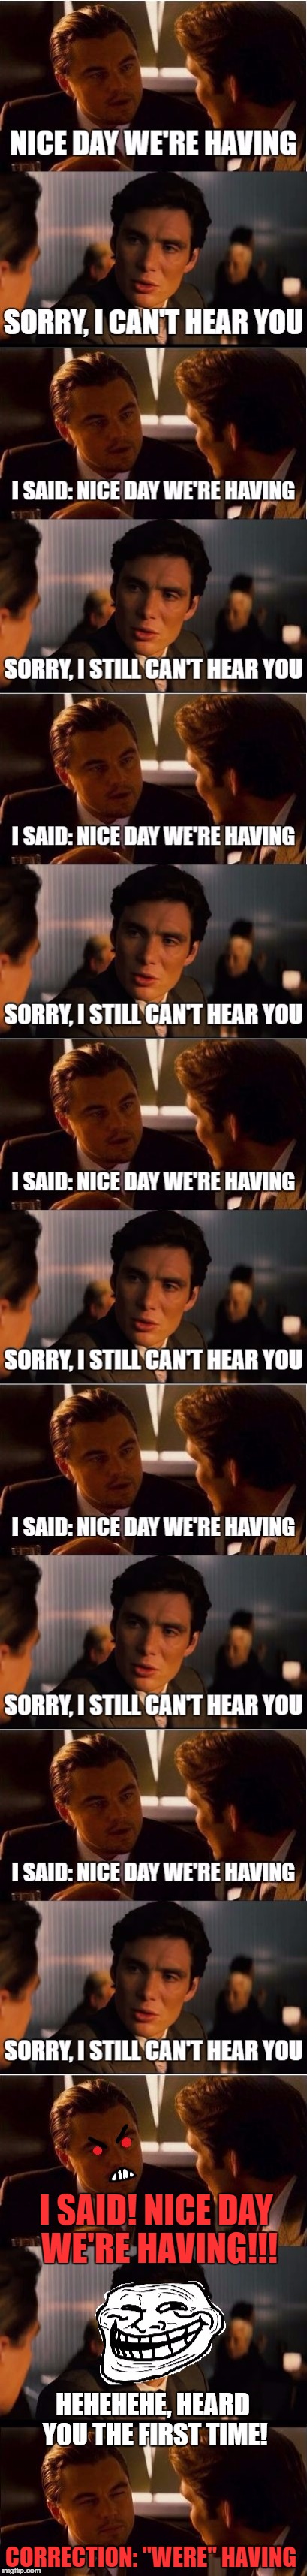 Inception Nice Day | I SAID! NICE DAY WE'RE HAVING!!! HEHEHEHE, HEARD YOU THE FIRST TIME! CORRECTION: "WERE" HAVING | image tagged in memes,inception,pete and repeat | made w/ Imgflip meme maker